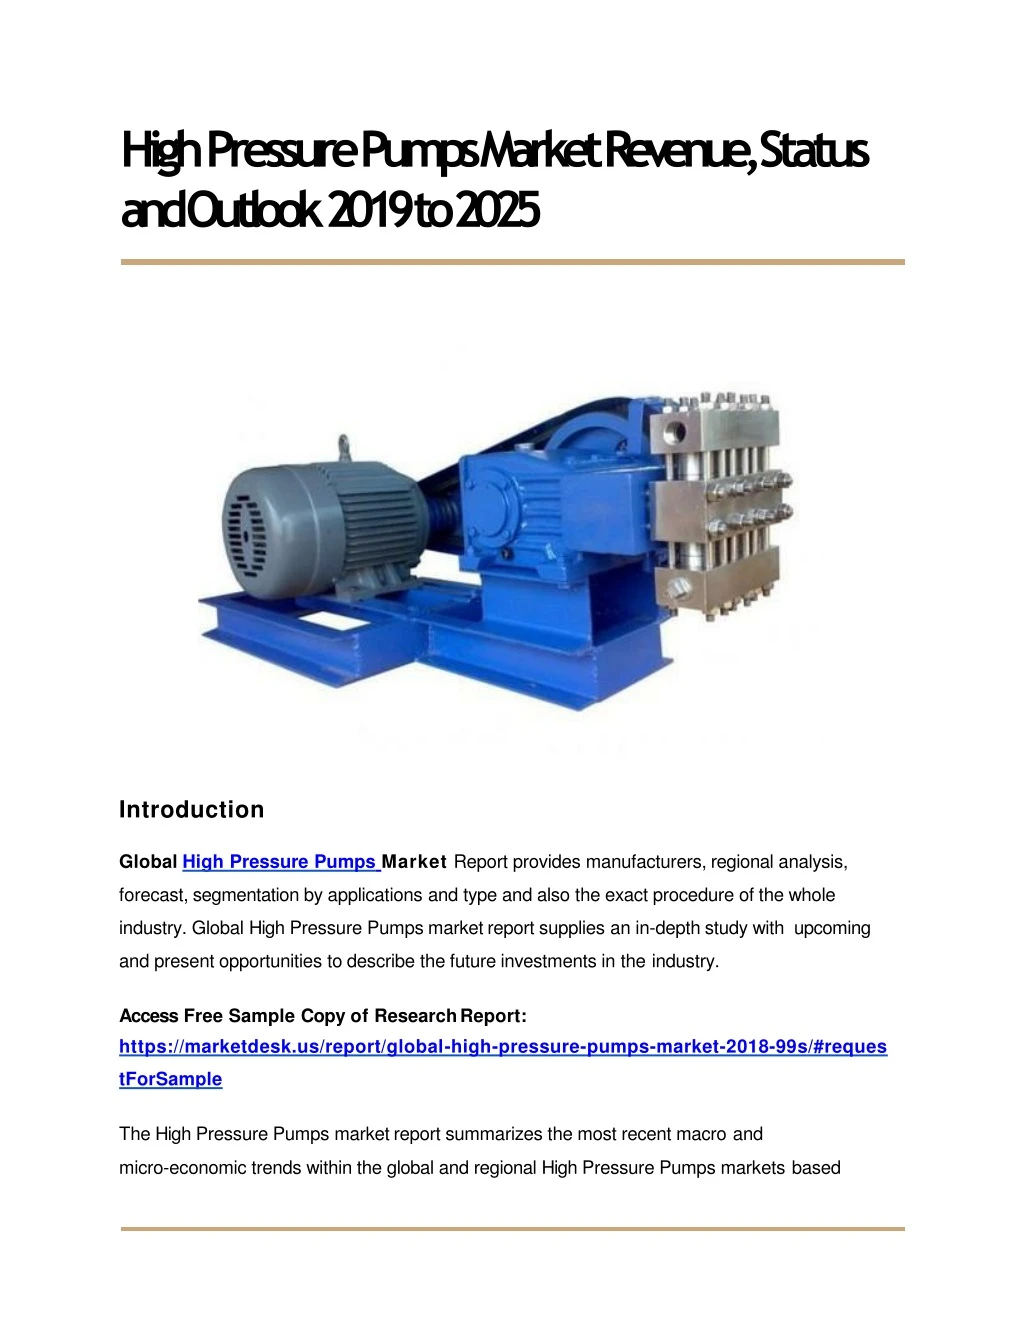 high pressure pumps market revenue status and outlook 2019 to 2025